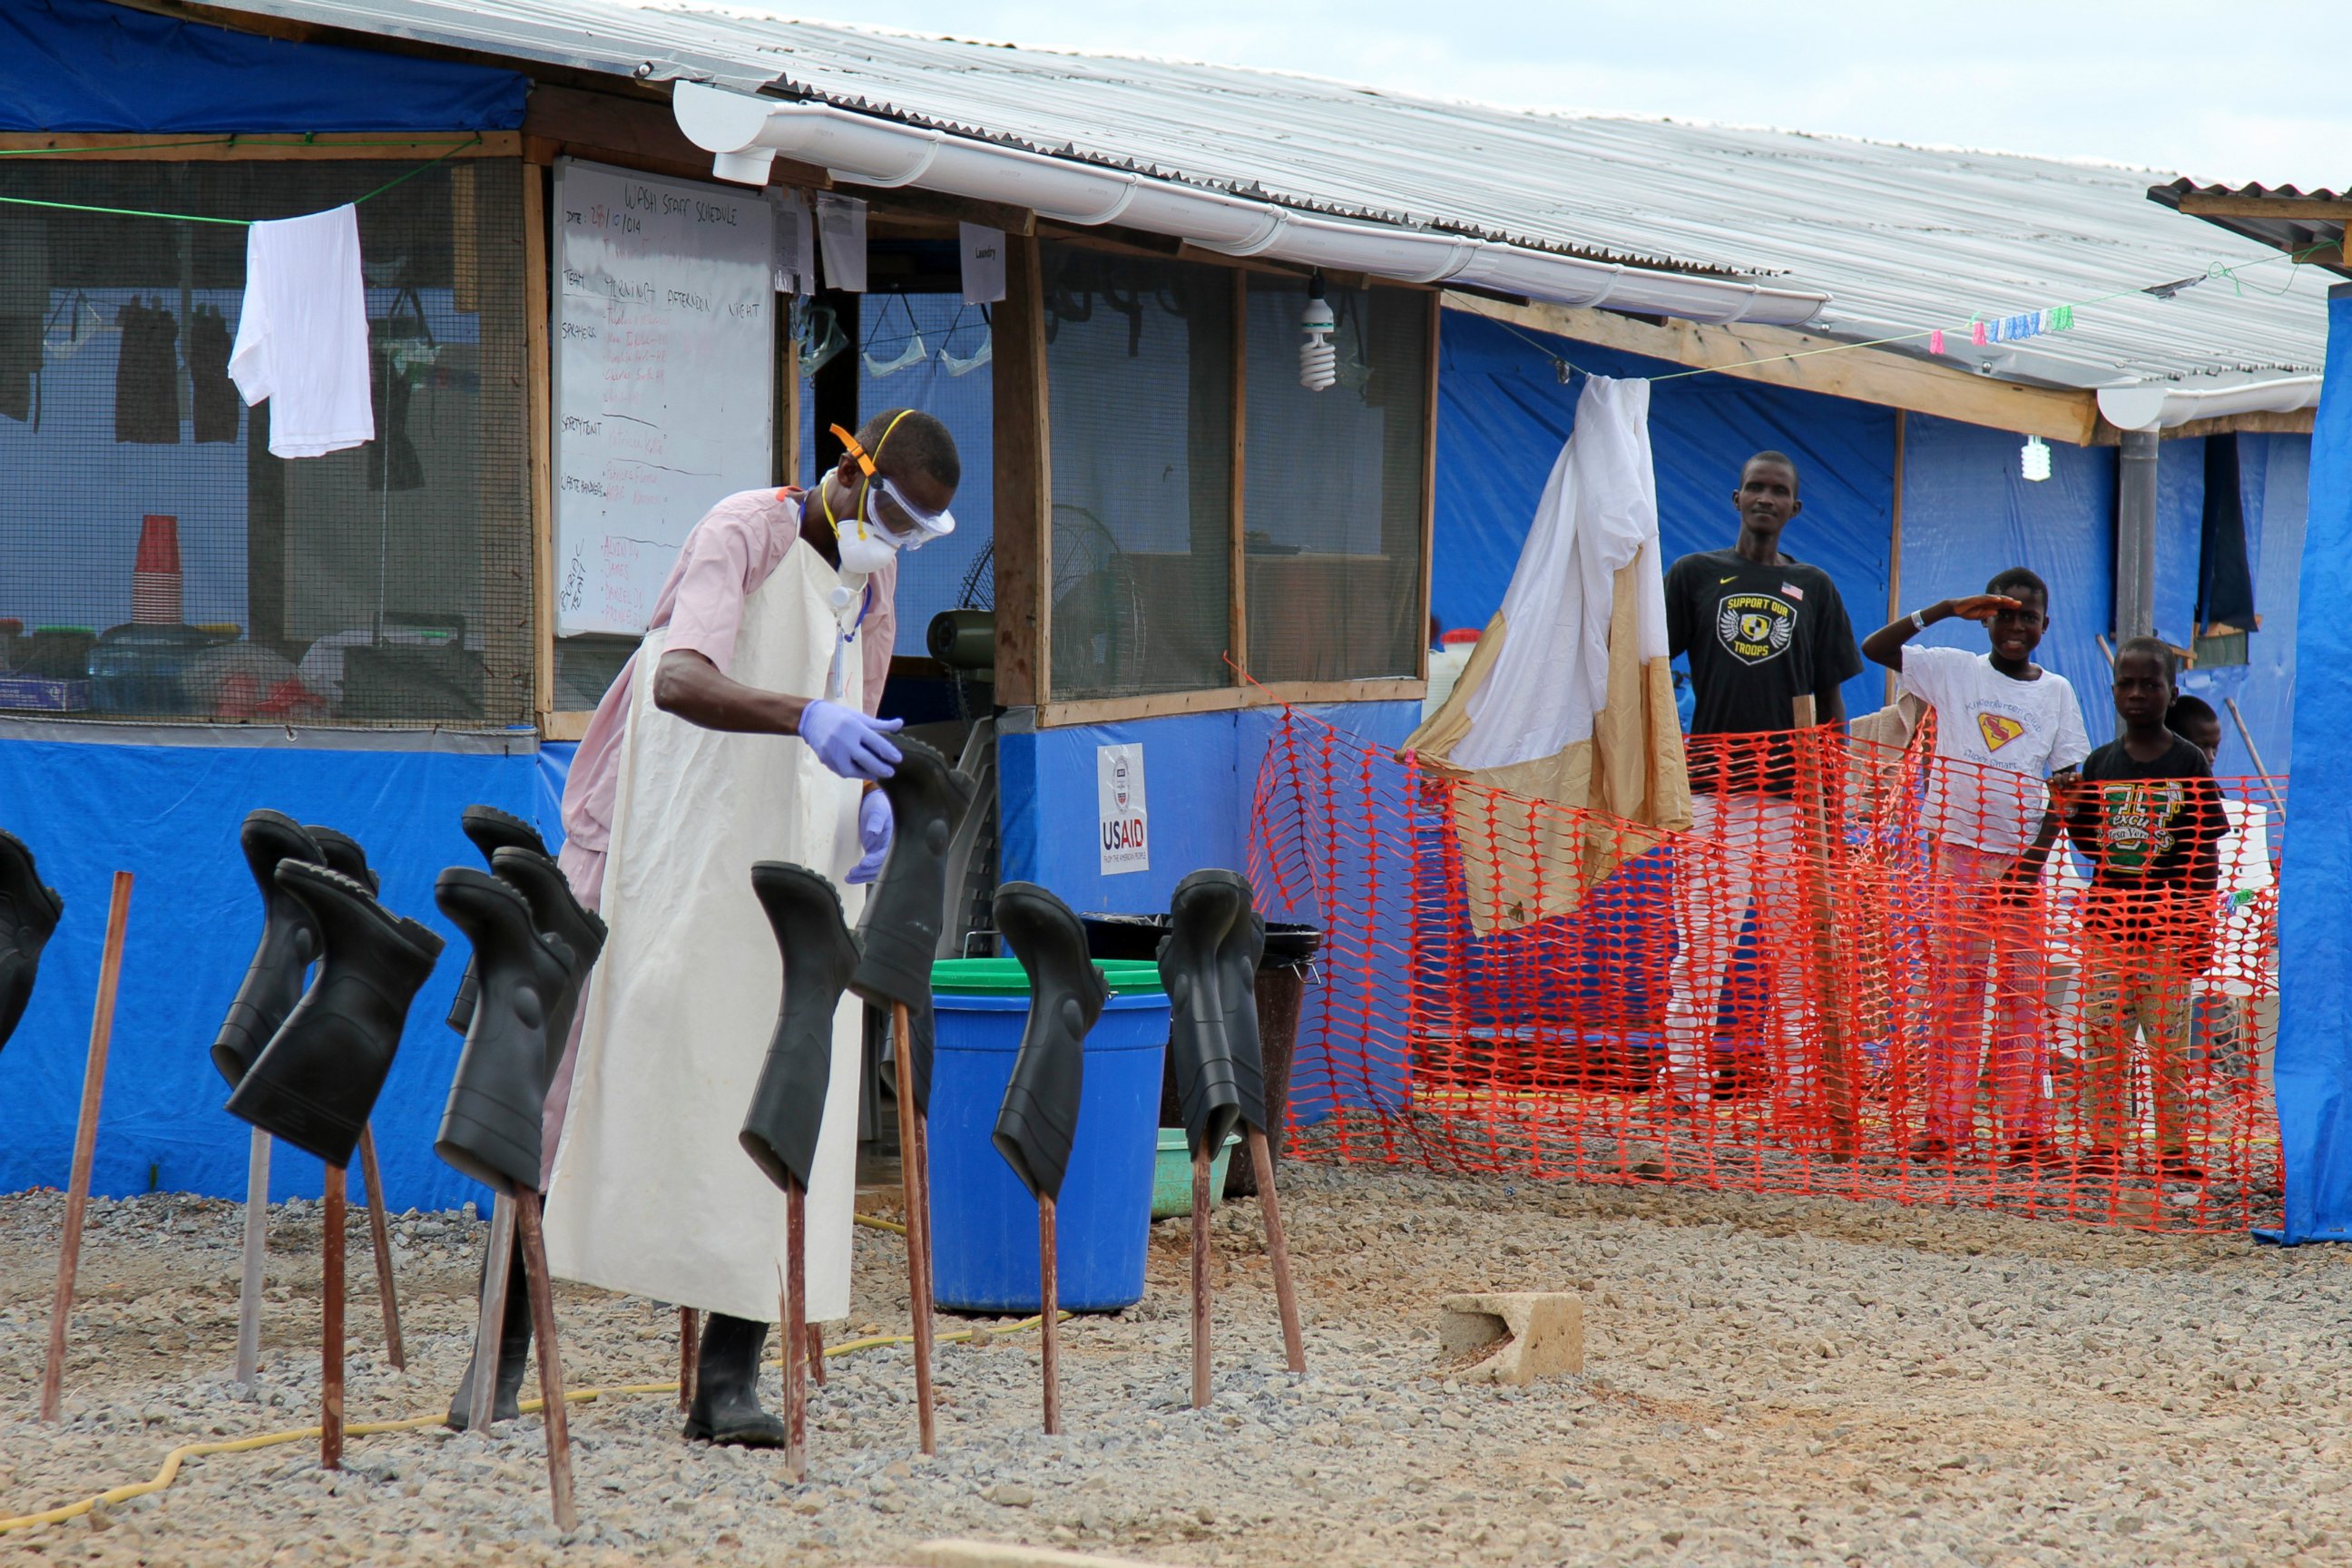 PHOTO: People stand in the "red zone" where they are being treated for Ebola at the Bong County Ebola Treatment Unit in Monrovia, Liberia, Oct. 28, 2014.